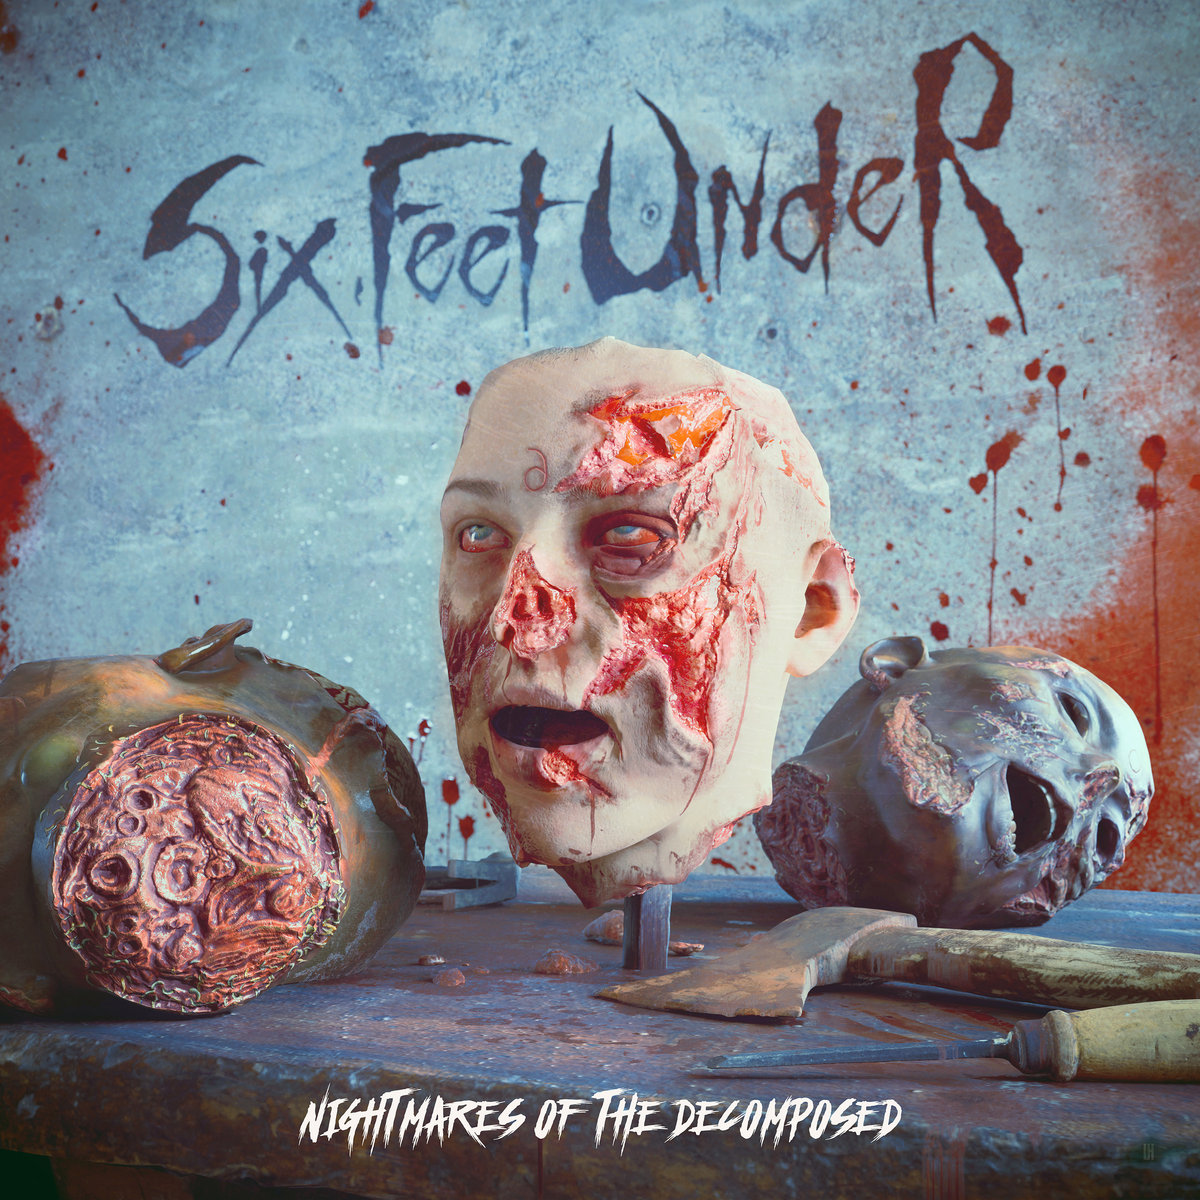 six feet under - nightmares of the decomposed - album cover